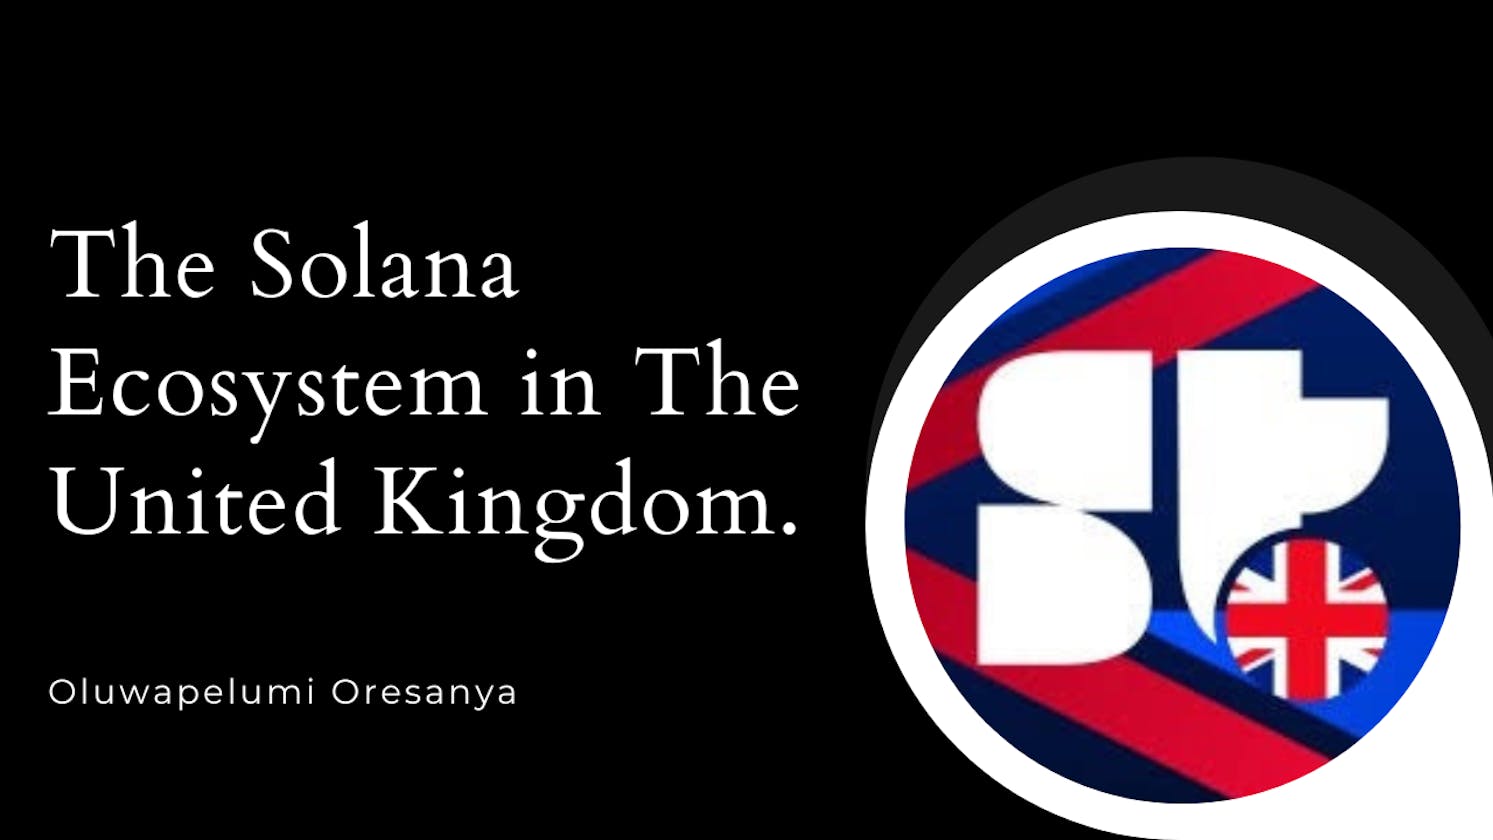 The Solana Ecosystem In The United Kingdom.